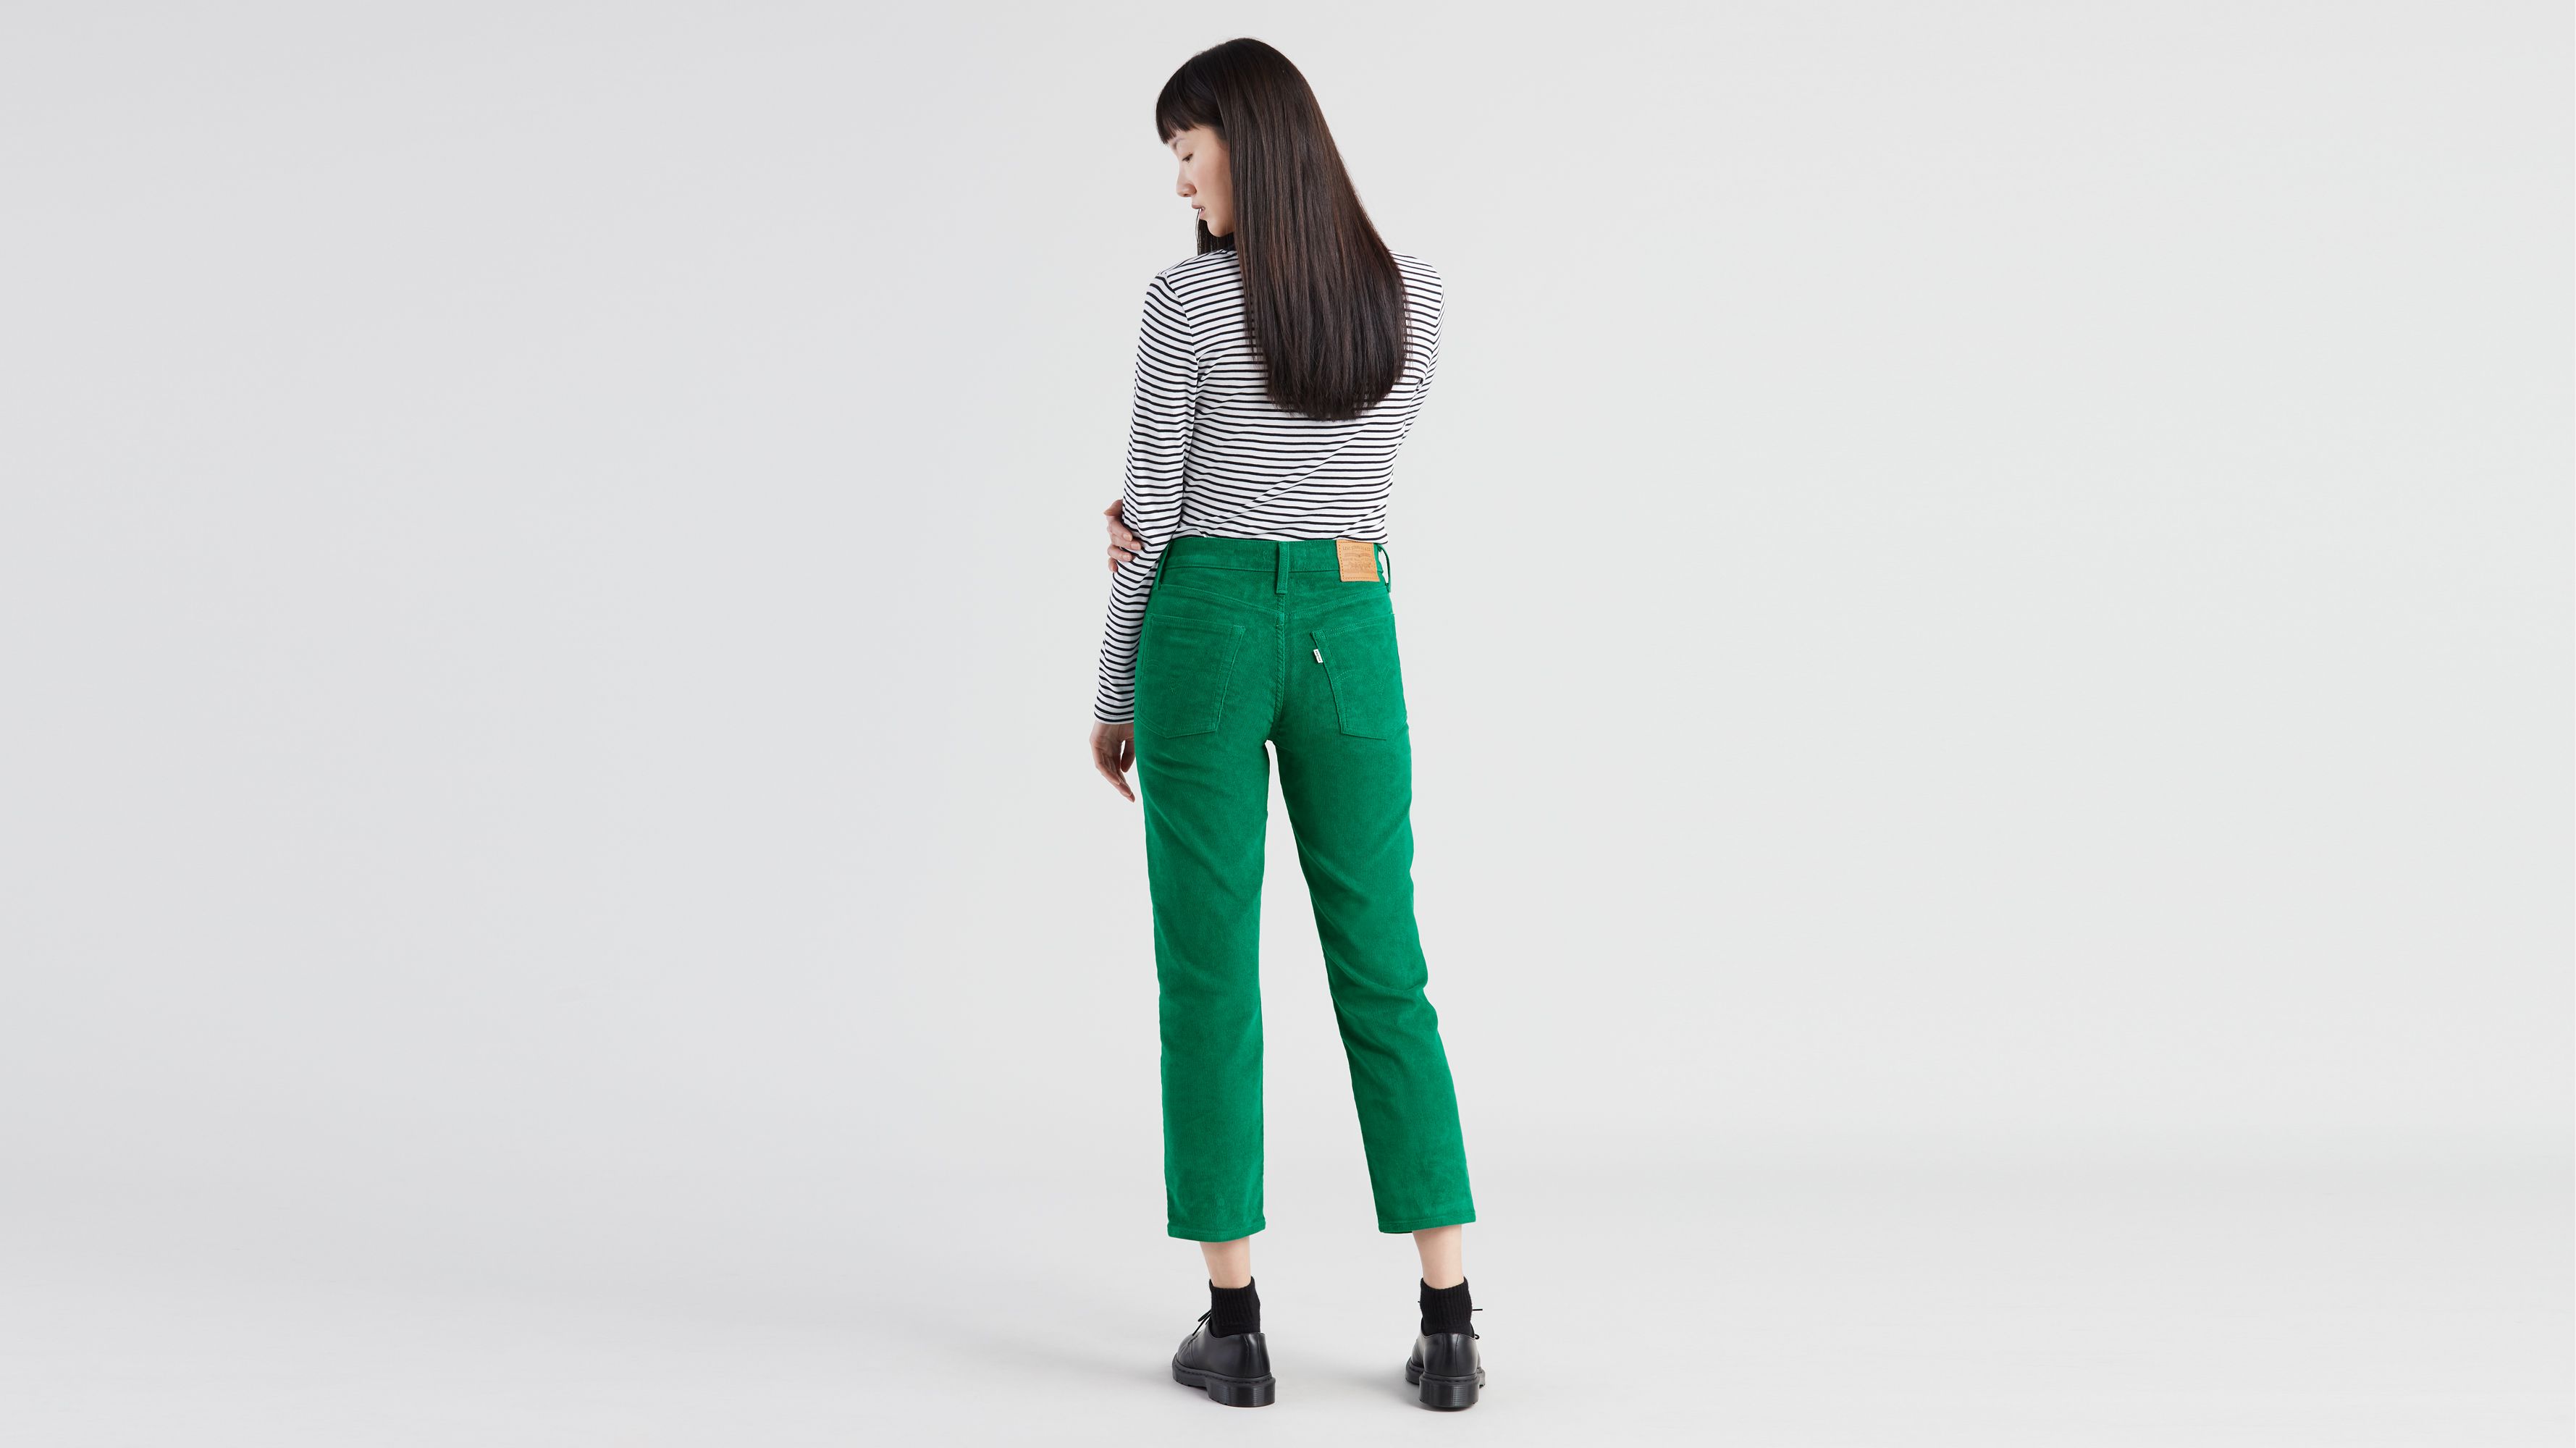 Wedgie Straight Fit Corduroy Pants - Green | Levi's® US